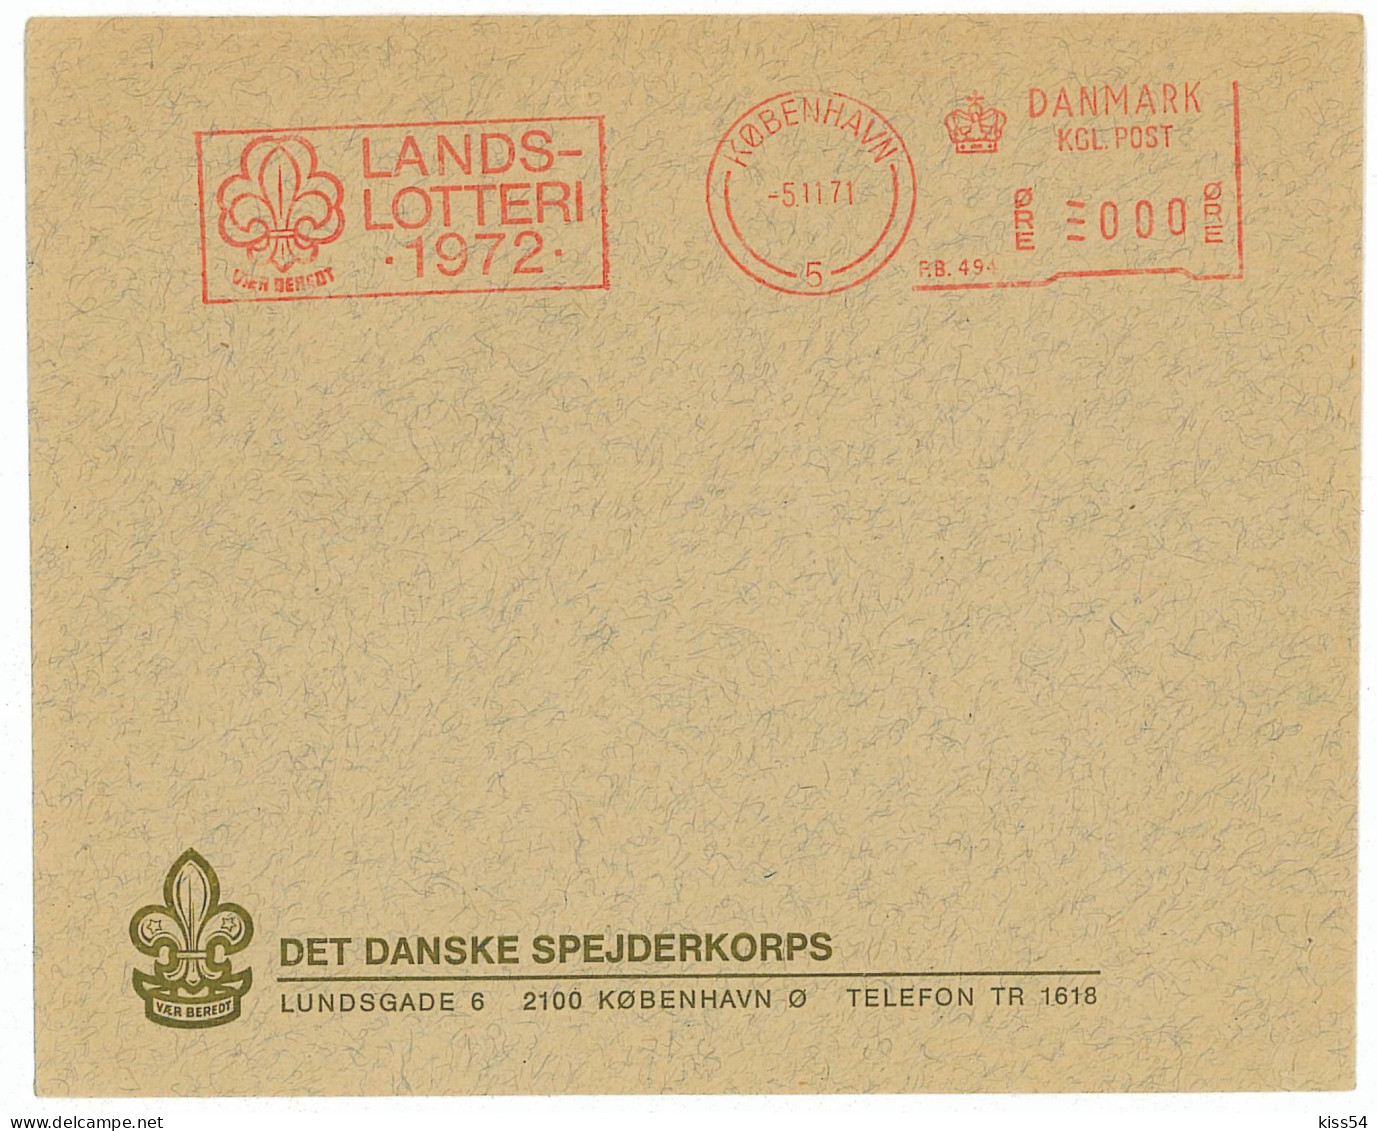 SC 27 - 856 Scout DENMARK - Cover Stationery - Used - 1972 - Storia Postale